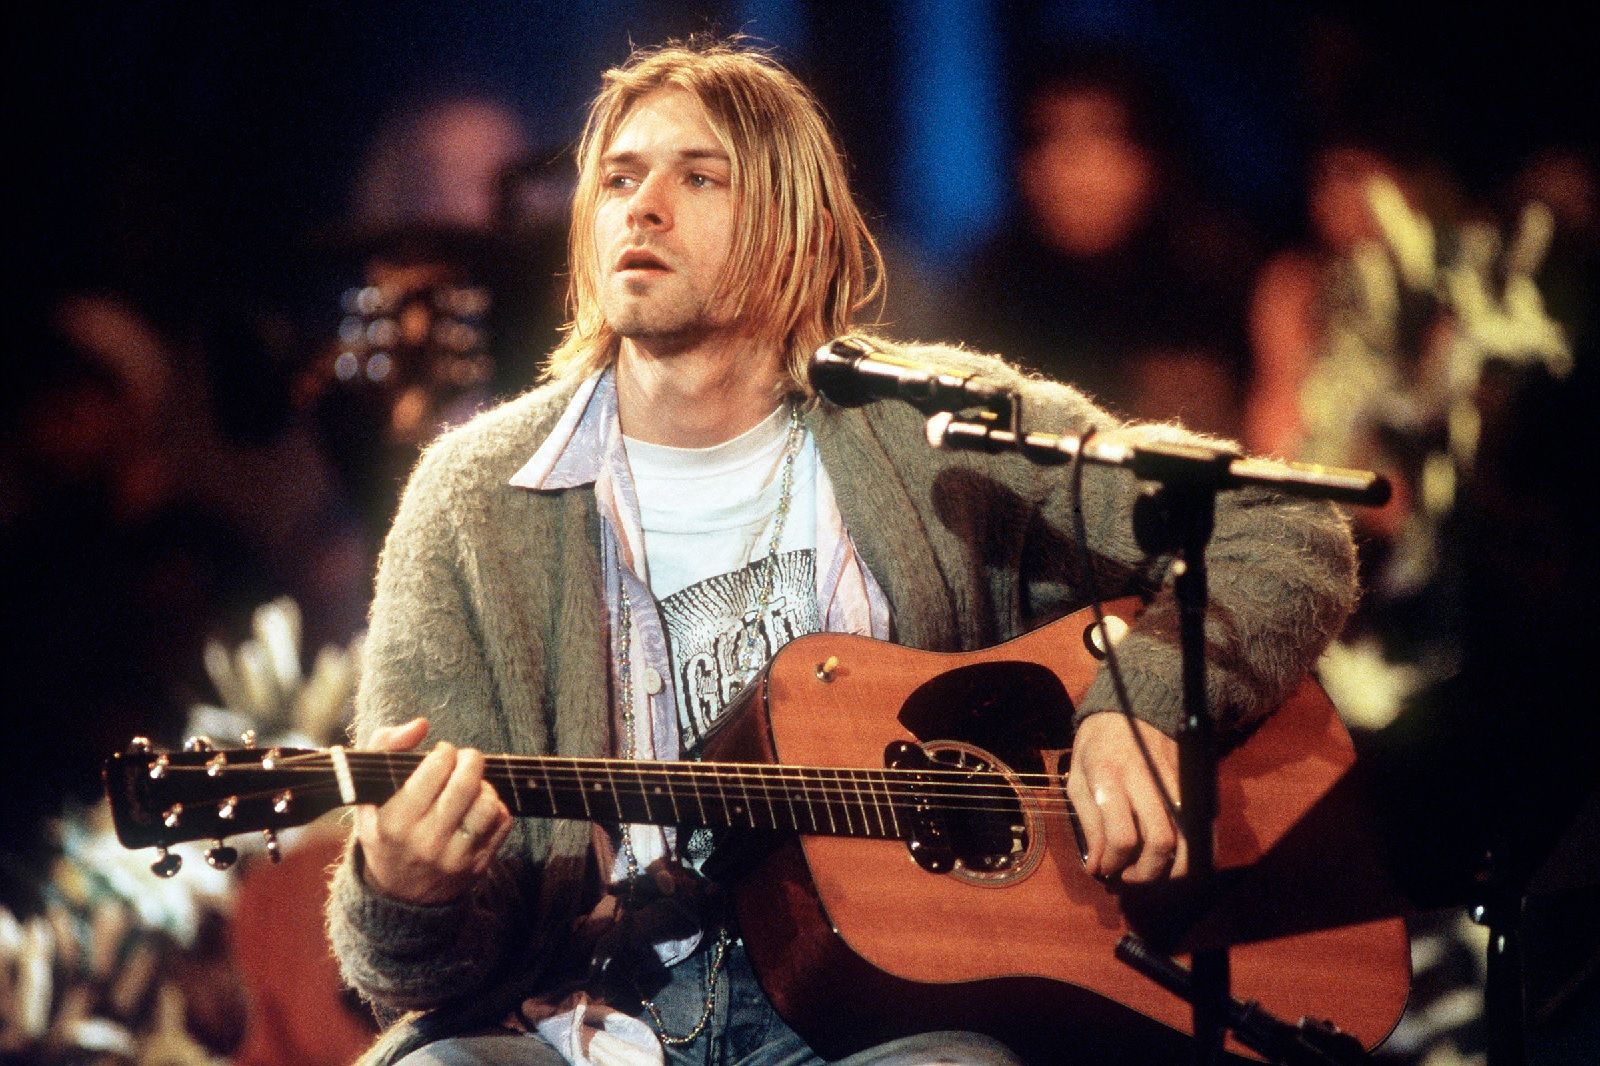 Kurt Cobain’s guitar and “MTV Unplugged” sweater head to auction  A unique chance to get a piece of rock history